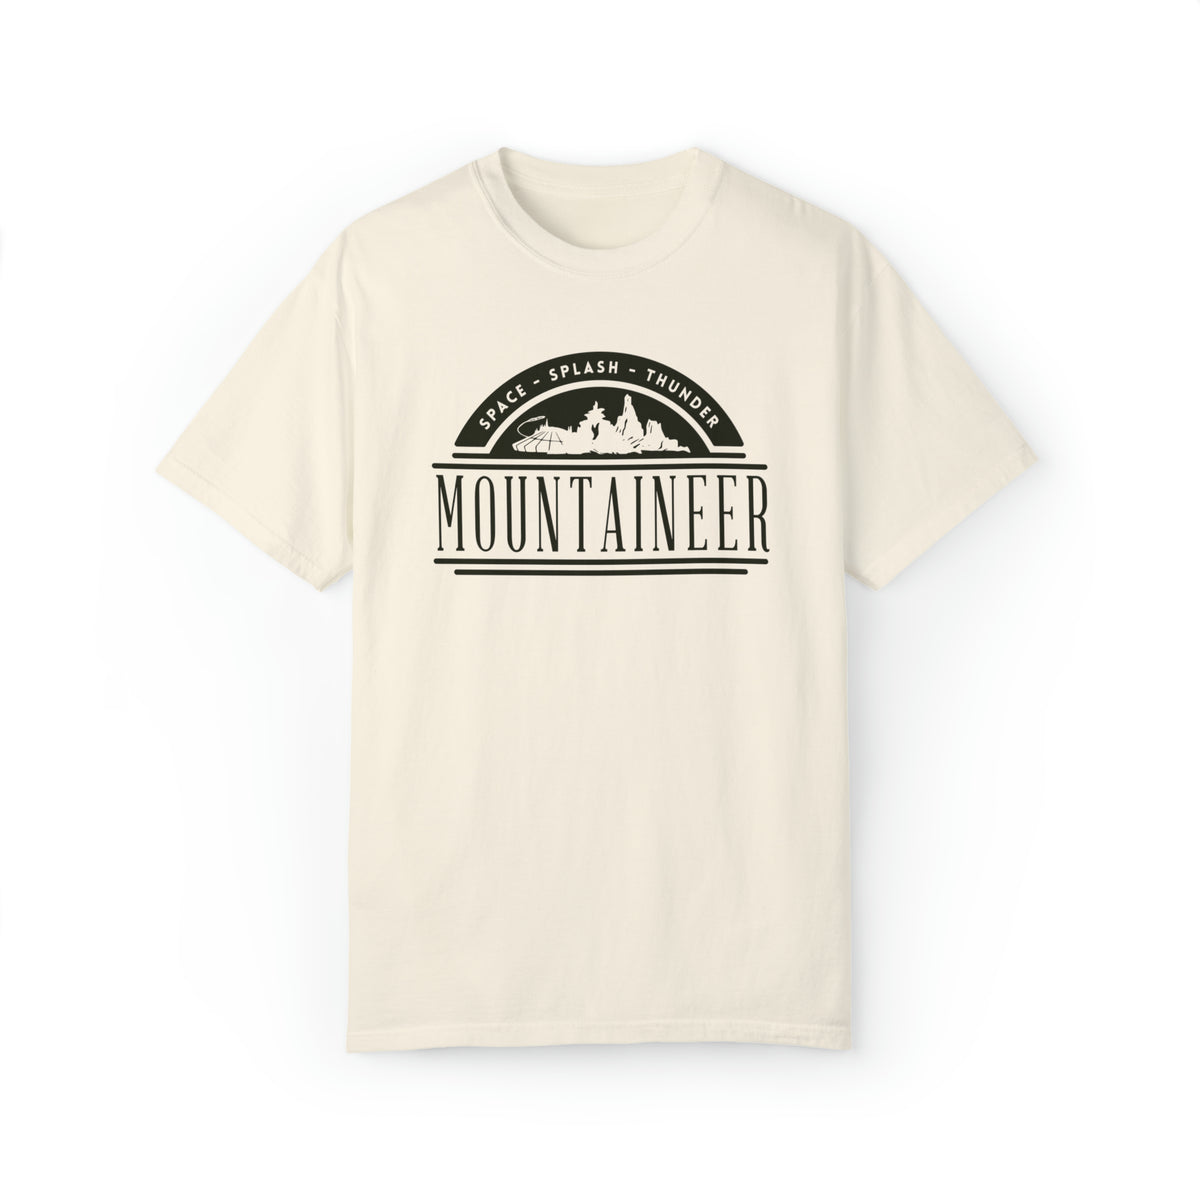 Mountaineer Comfort Colors Unisex Garment-Dyed T-shirt